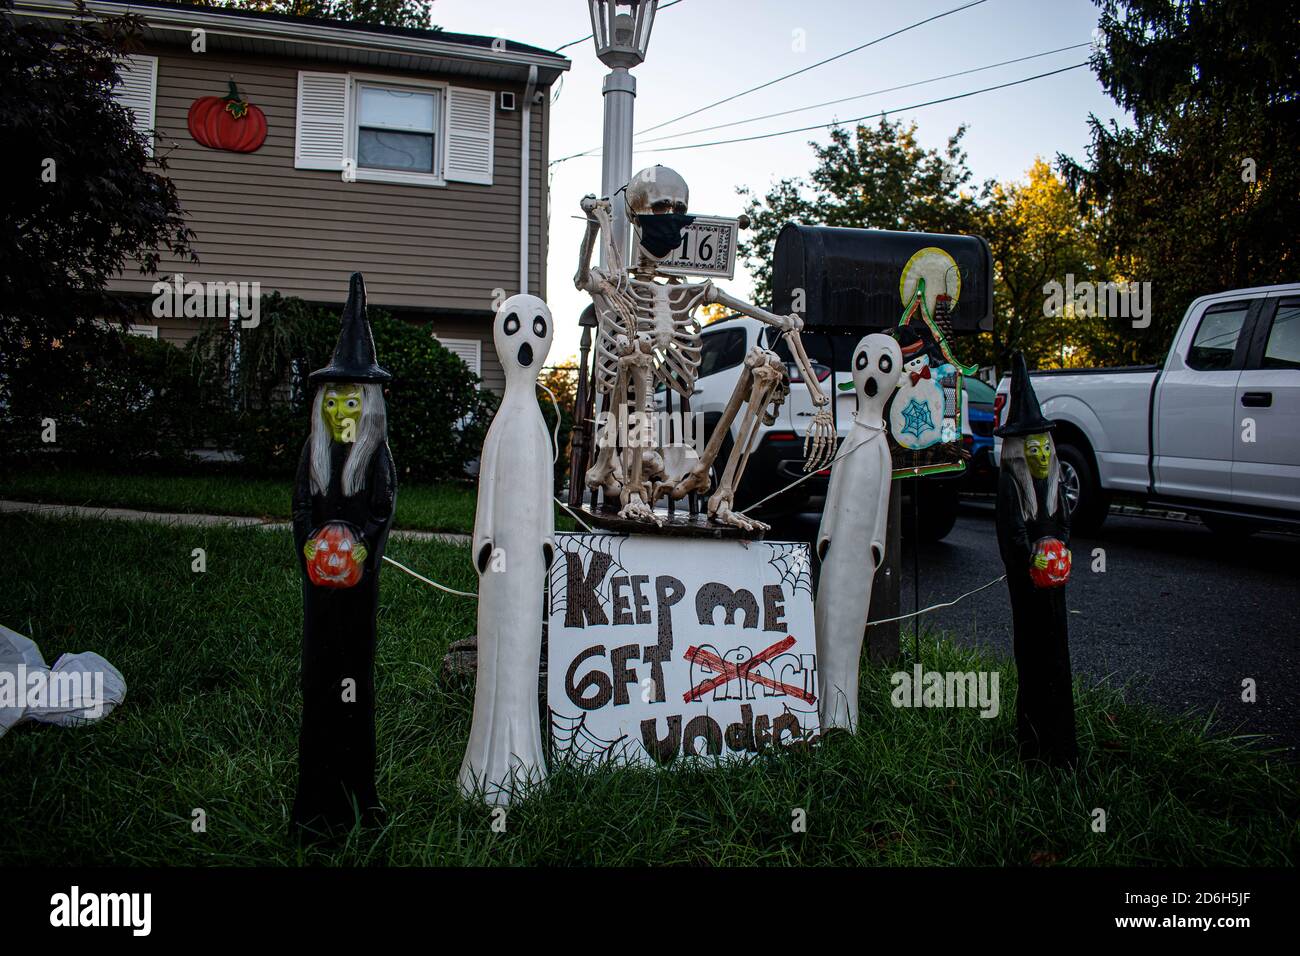 New Jersey Family Puts Up Halloween Decorations Promoting Social Distancing Stock Photo